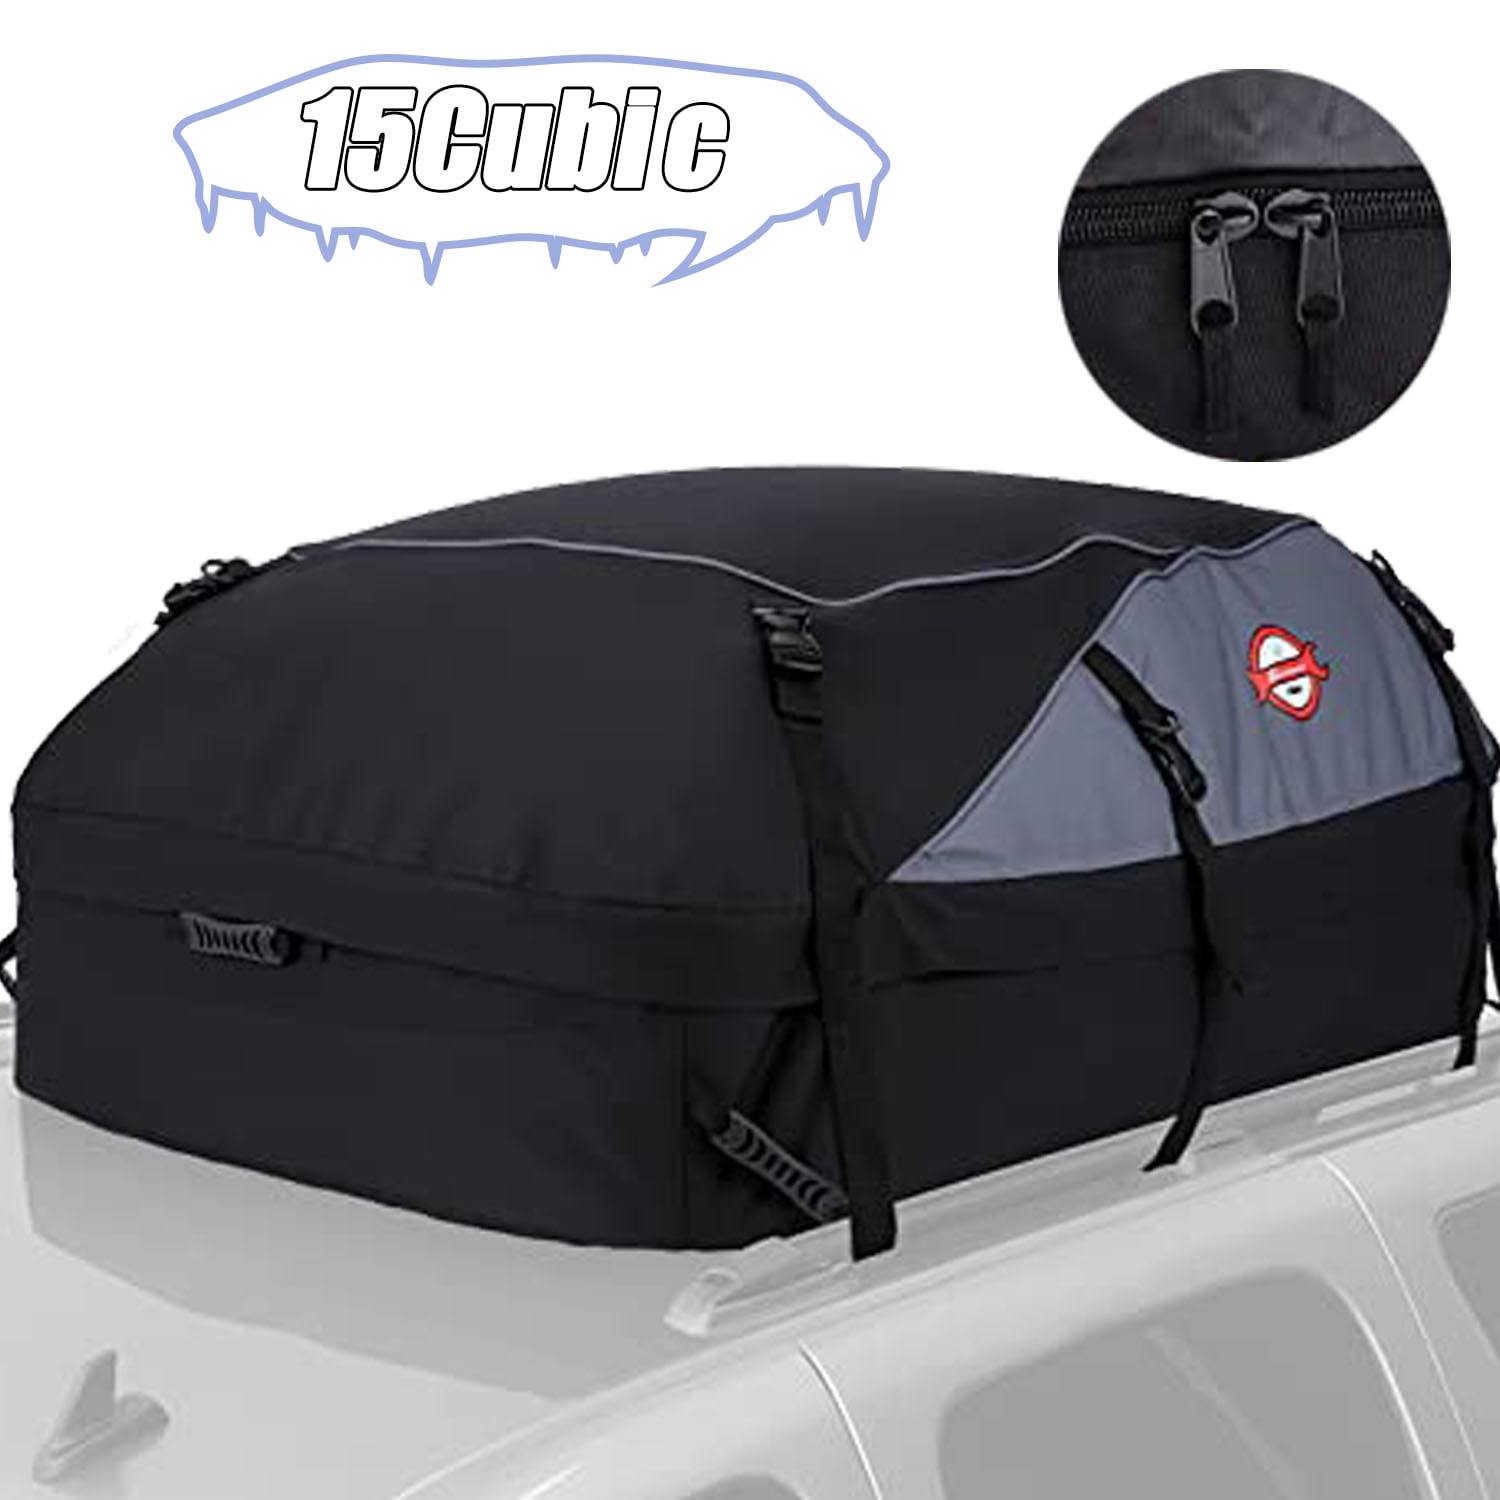 Mockins 25 Cubic Ft Waterproof Cargo Carrier Bag 59.5 x 23.5x 30.5 The Hitch Rack Cargo Bag is Made of Heavy Duty Abrasion Resistant Vinyl Strong Enough to Endure High Intensity Weather Conditions…